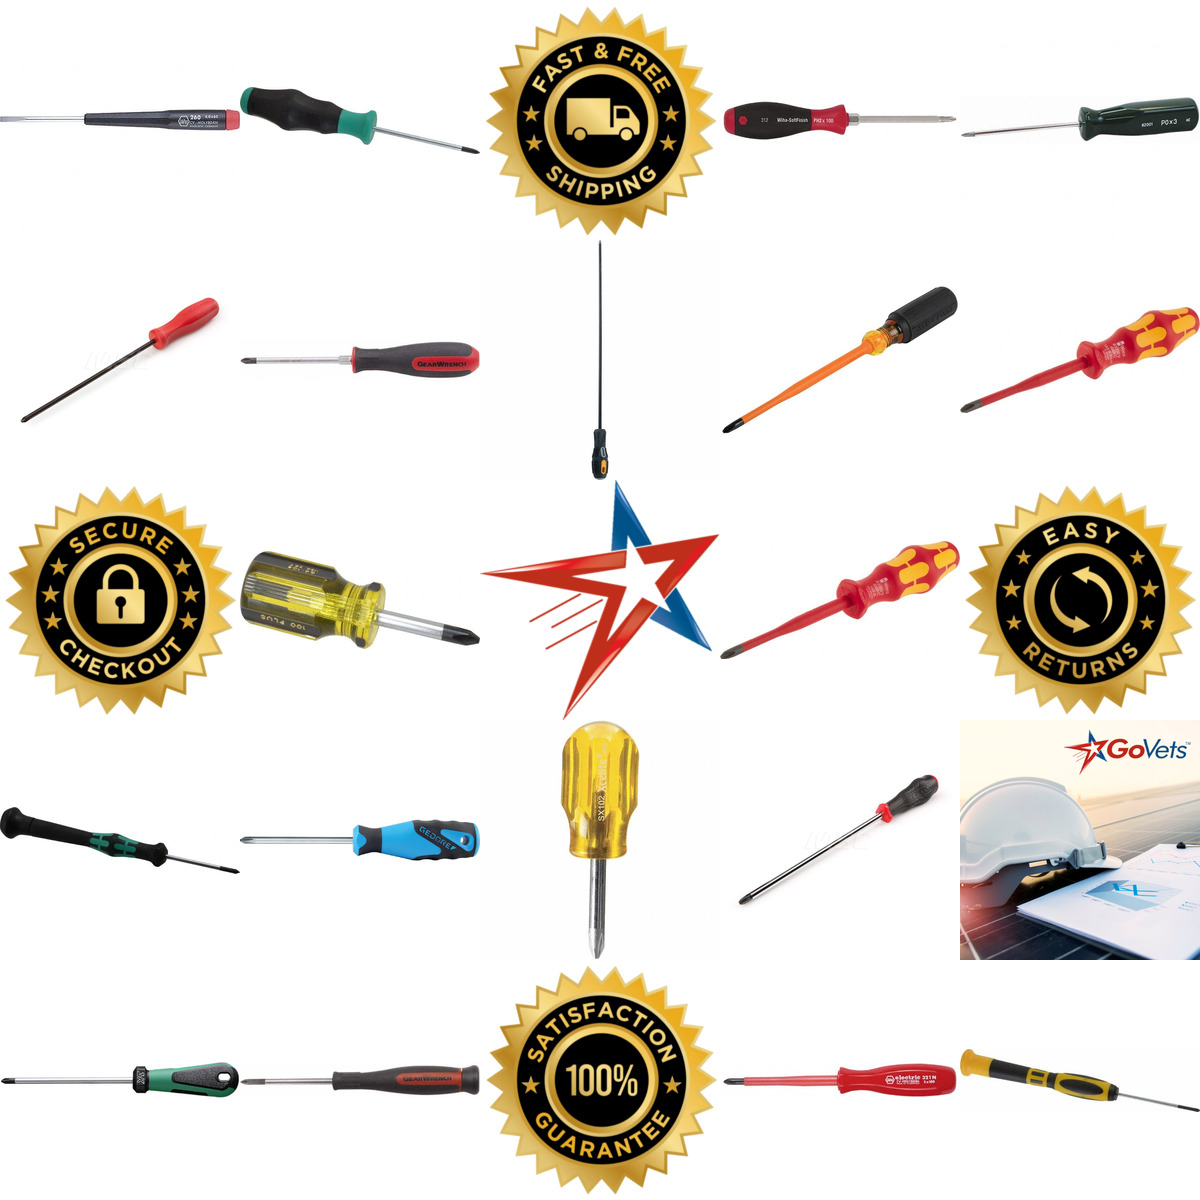 A selection of Phillips Screwdrivers products on GoVets